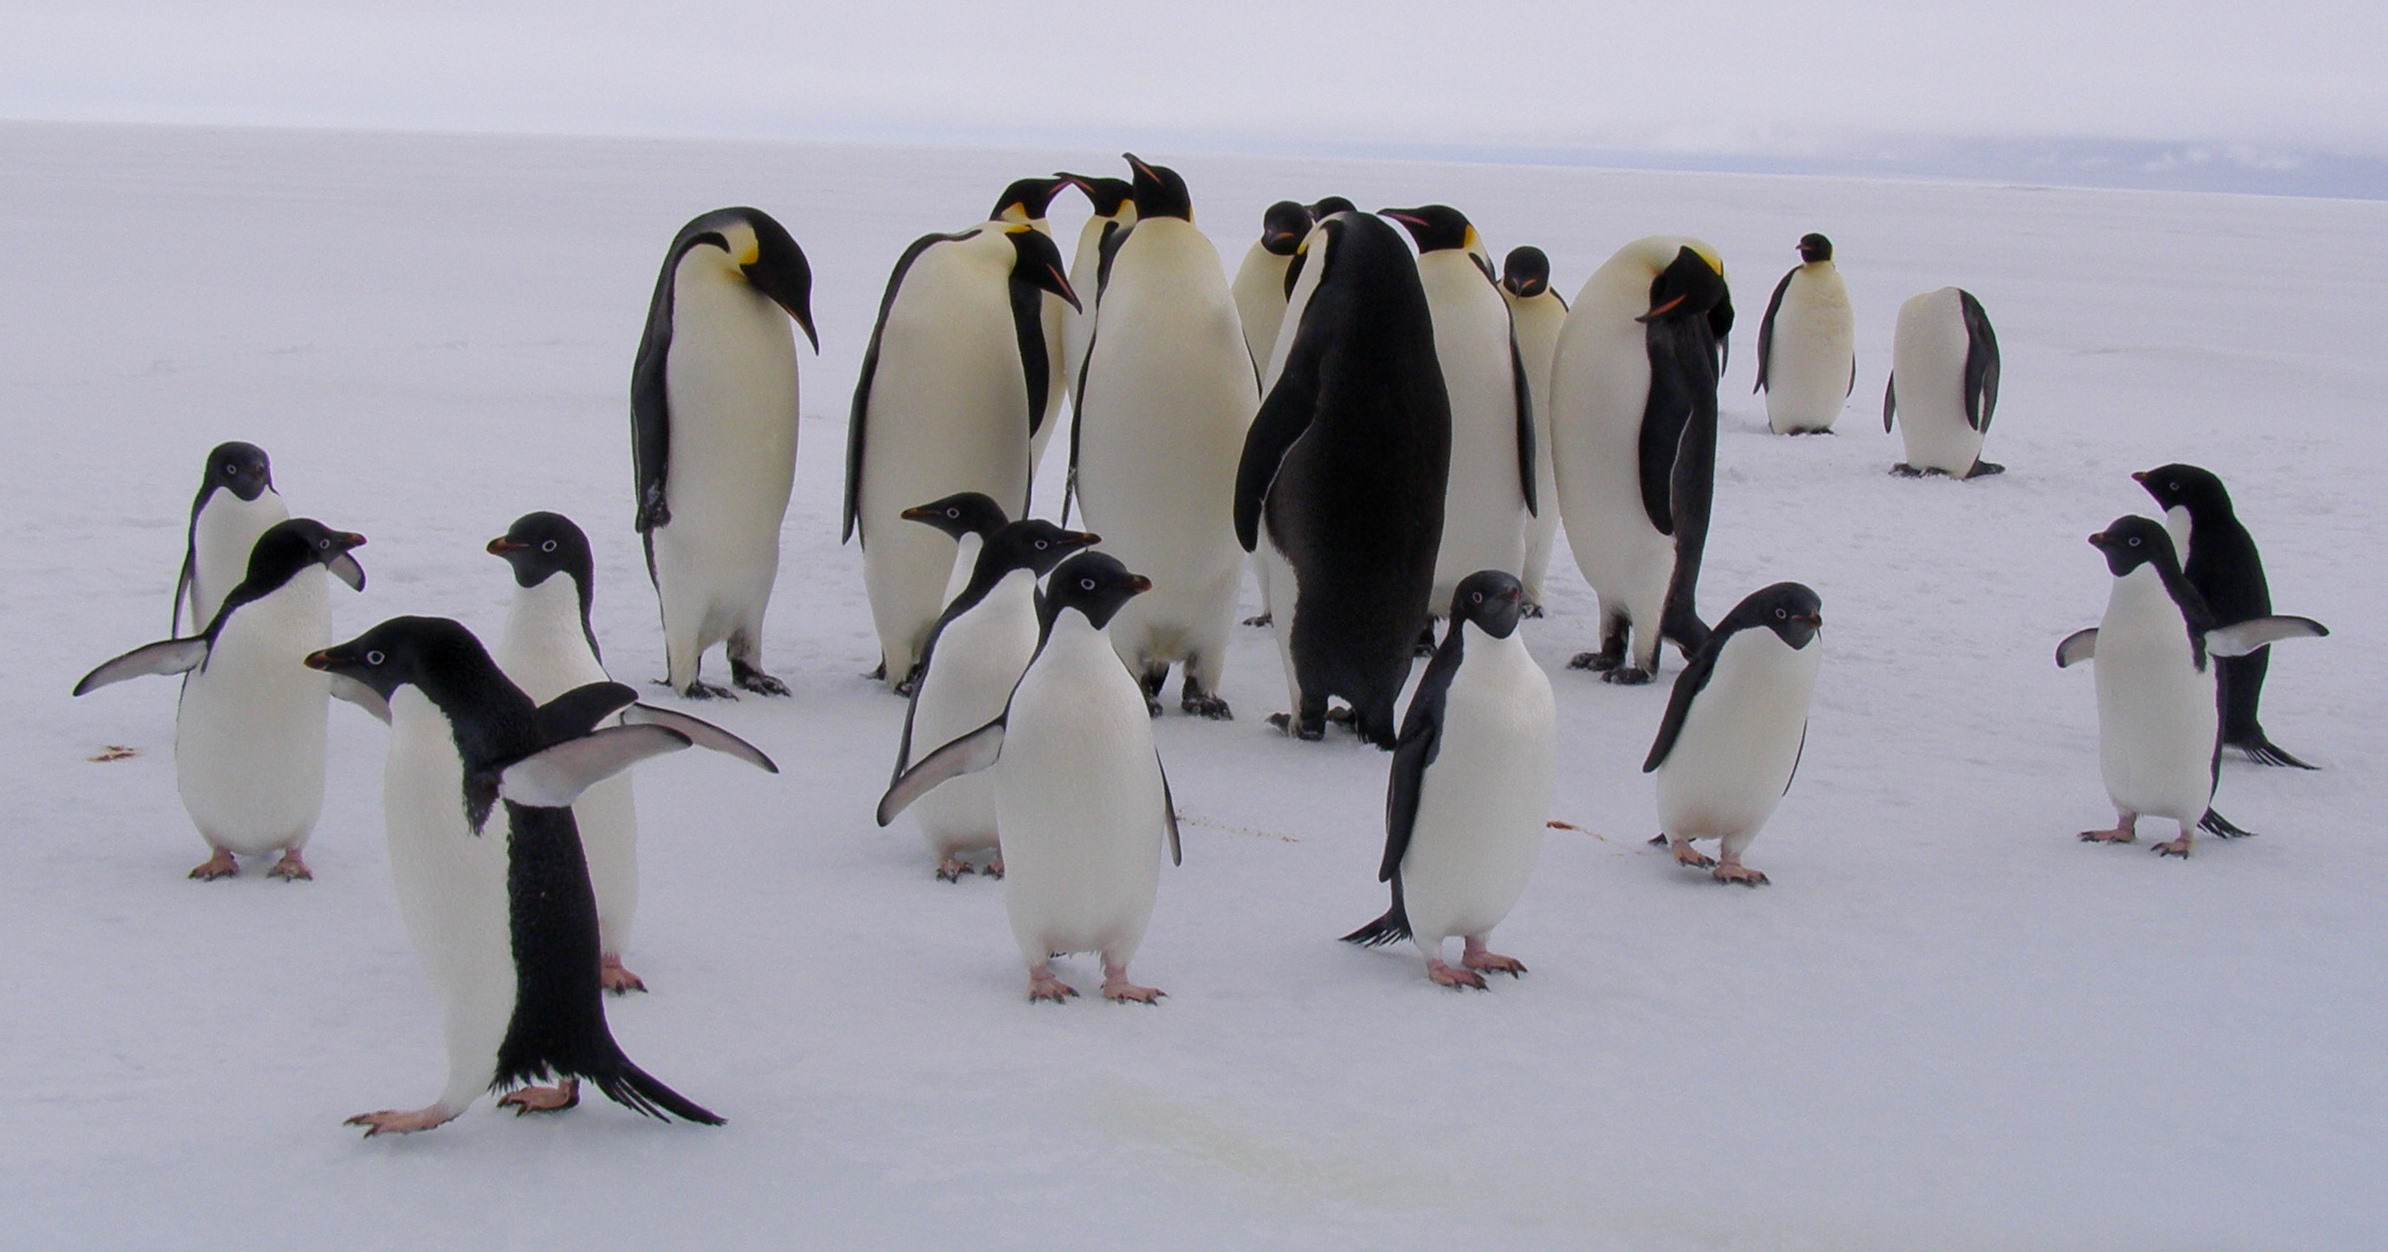 An Adelie (foreground) and Emperor penguin social